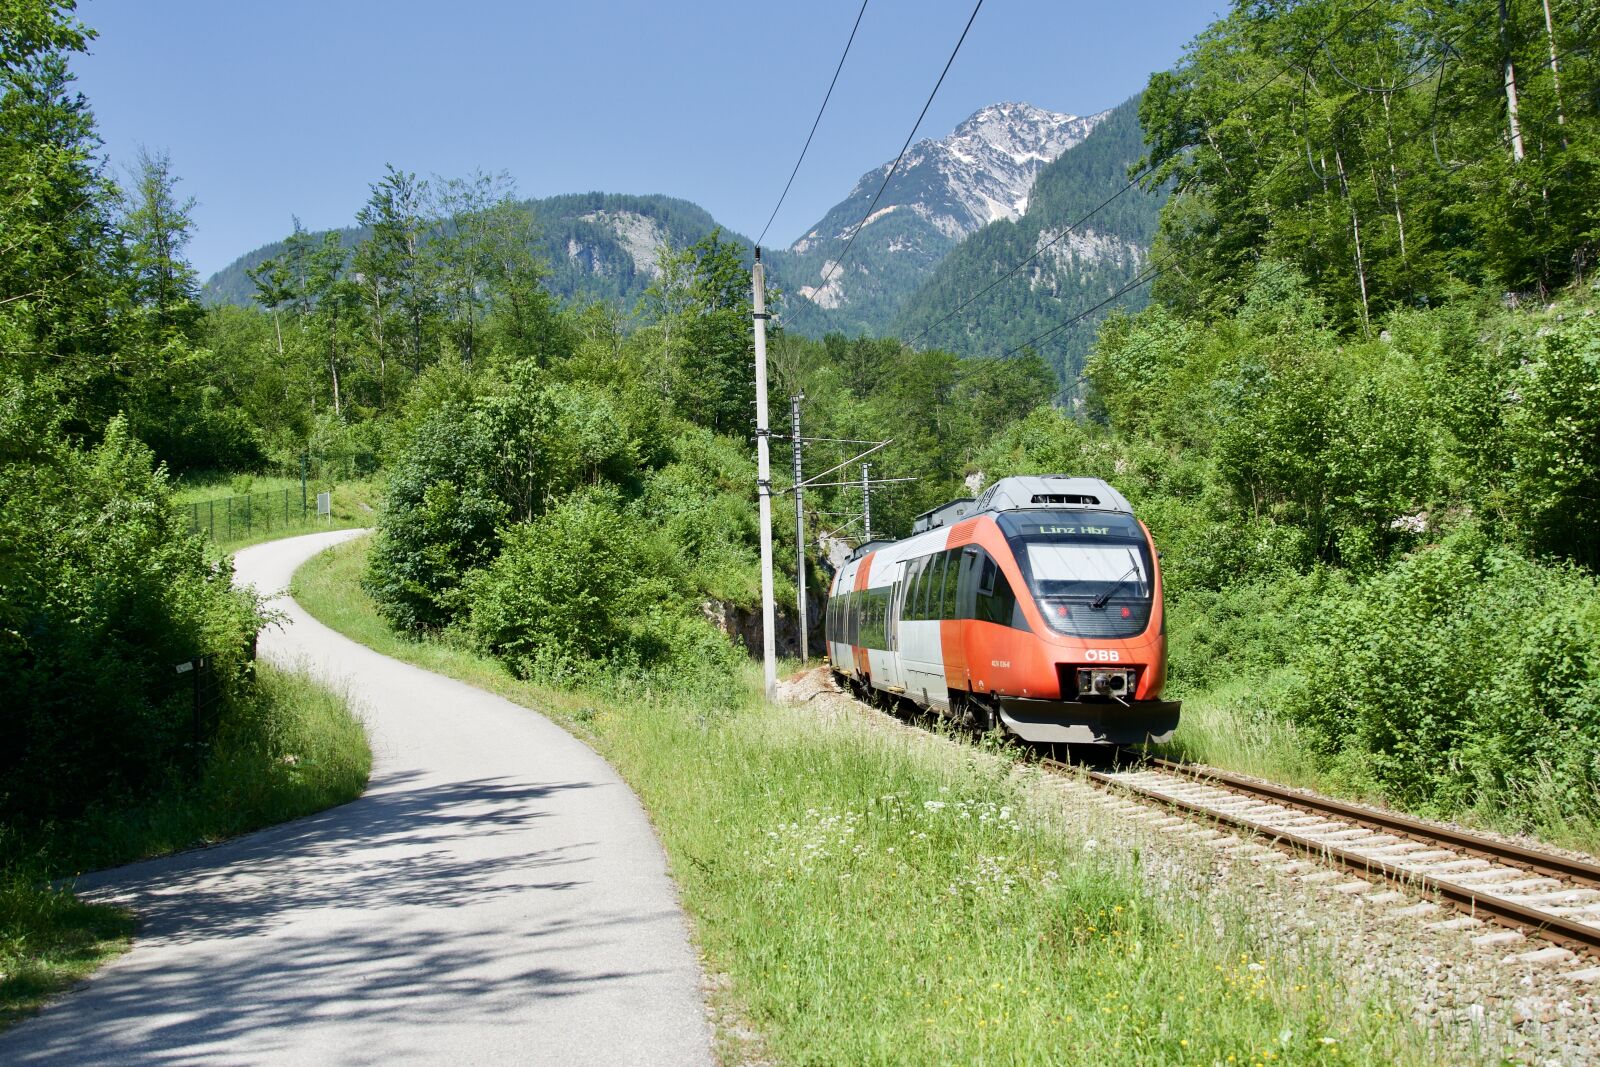 Sony a6500 sample photo. Train, mountains, transport photography